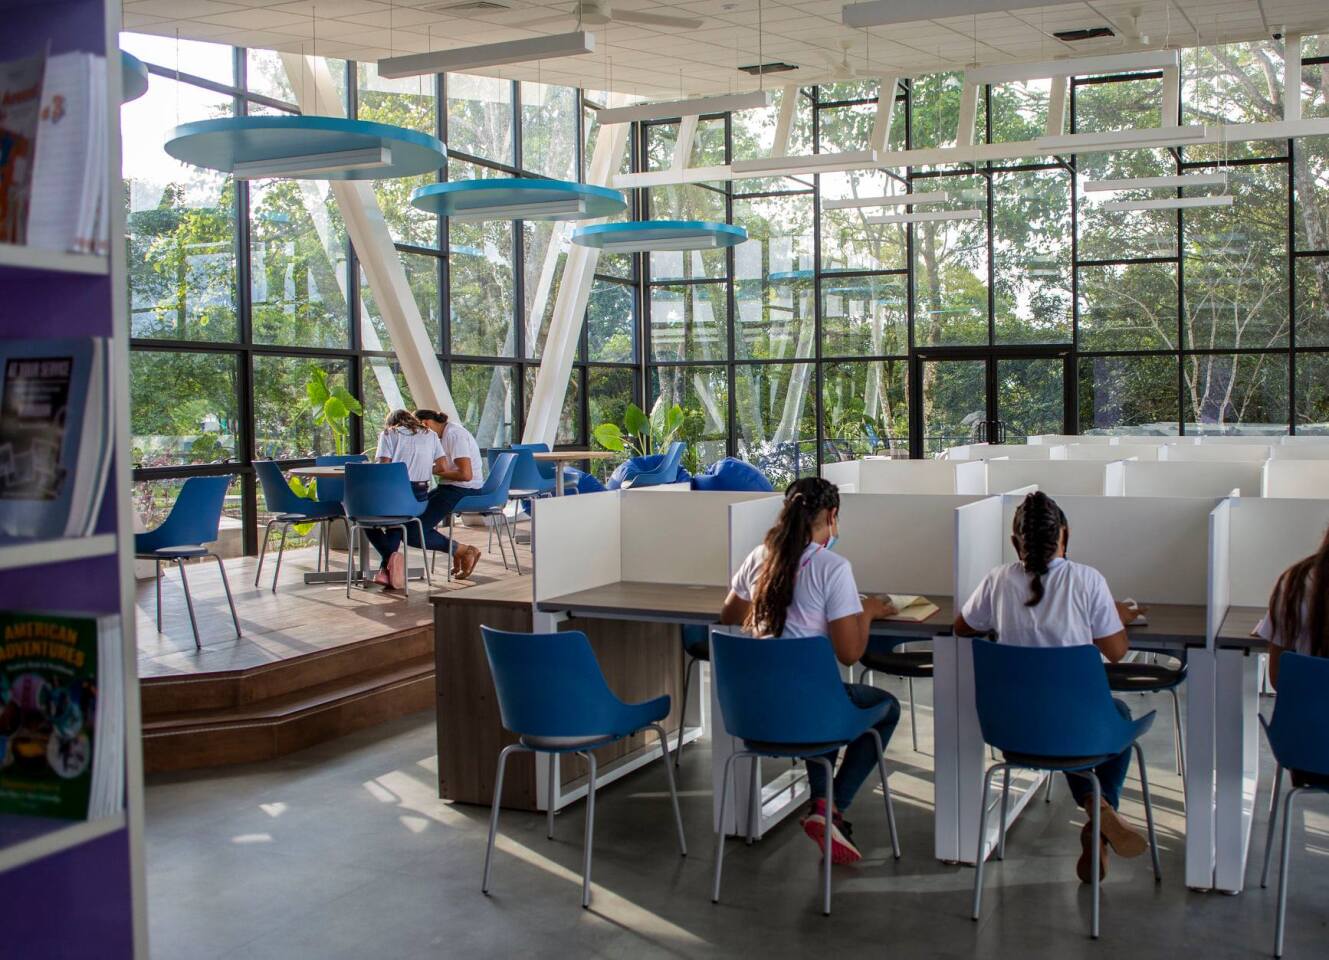 Students studying in the library at Escuela Vera Angelita.